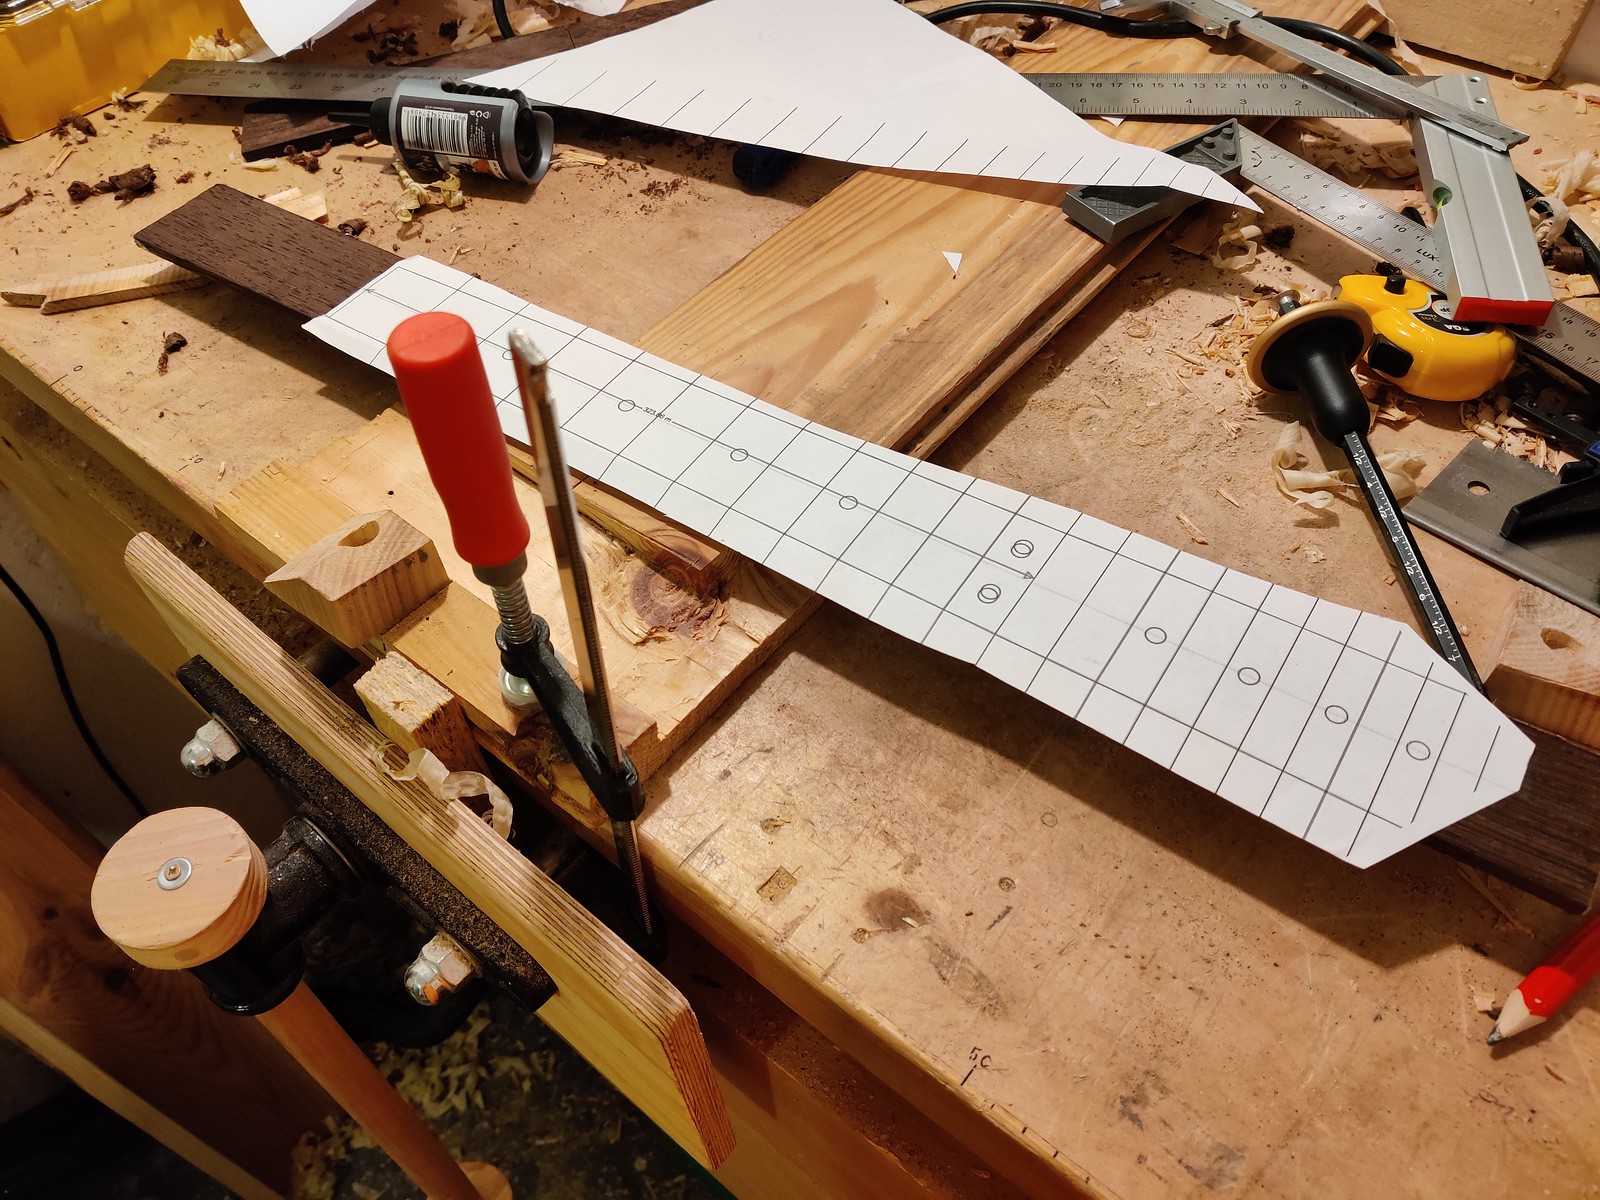 Fretboard blank with a template on it